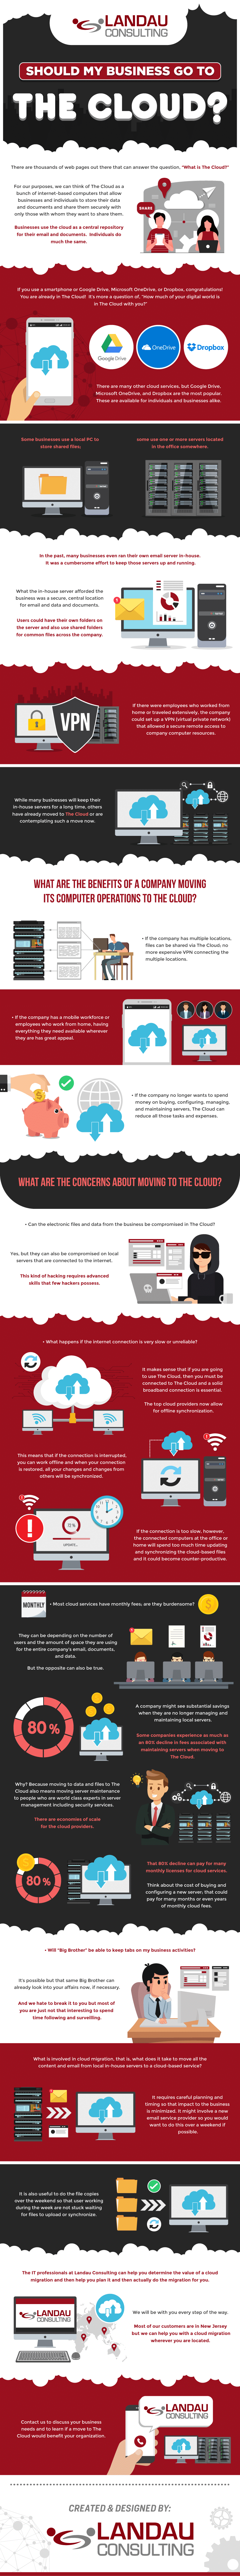 Should my business go to The Cloud?